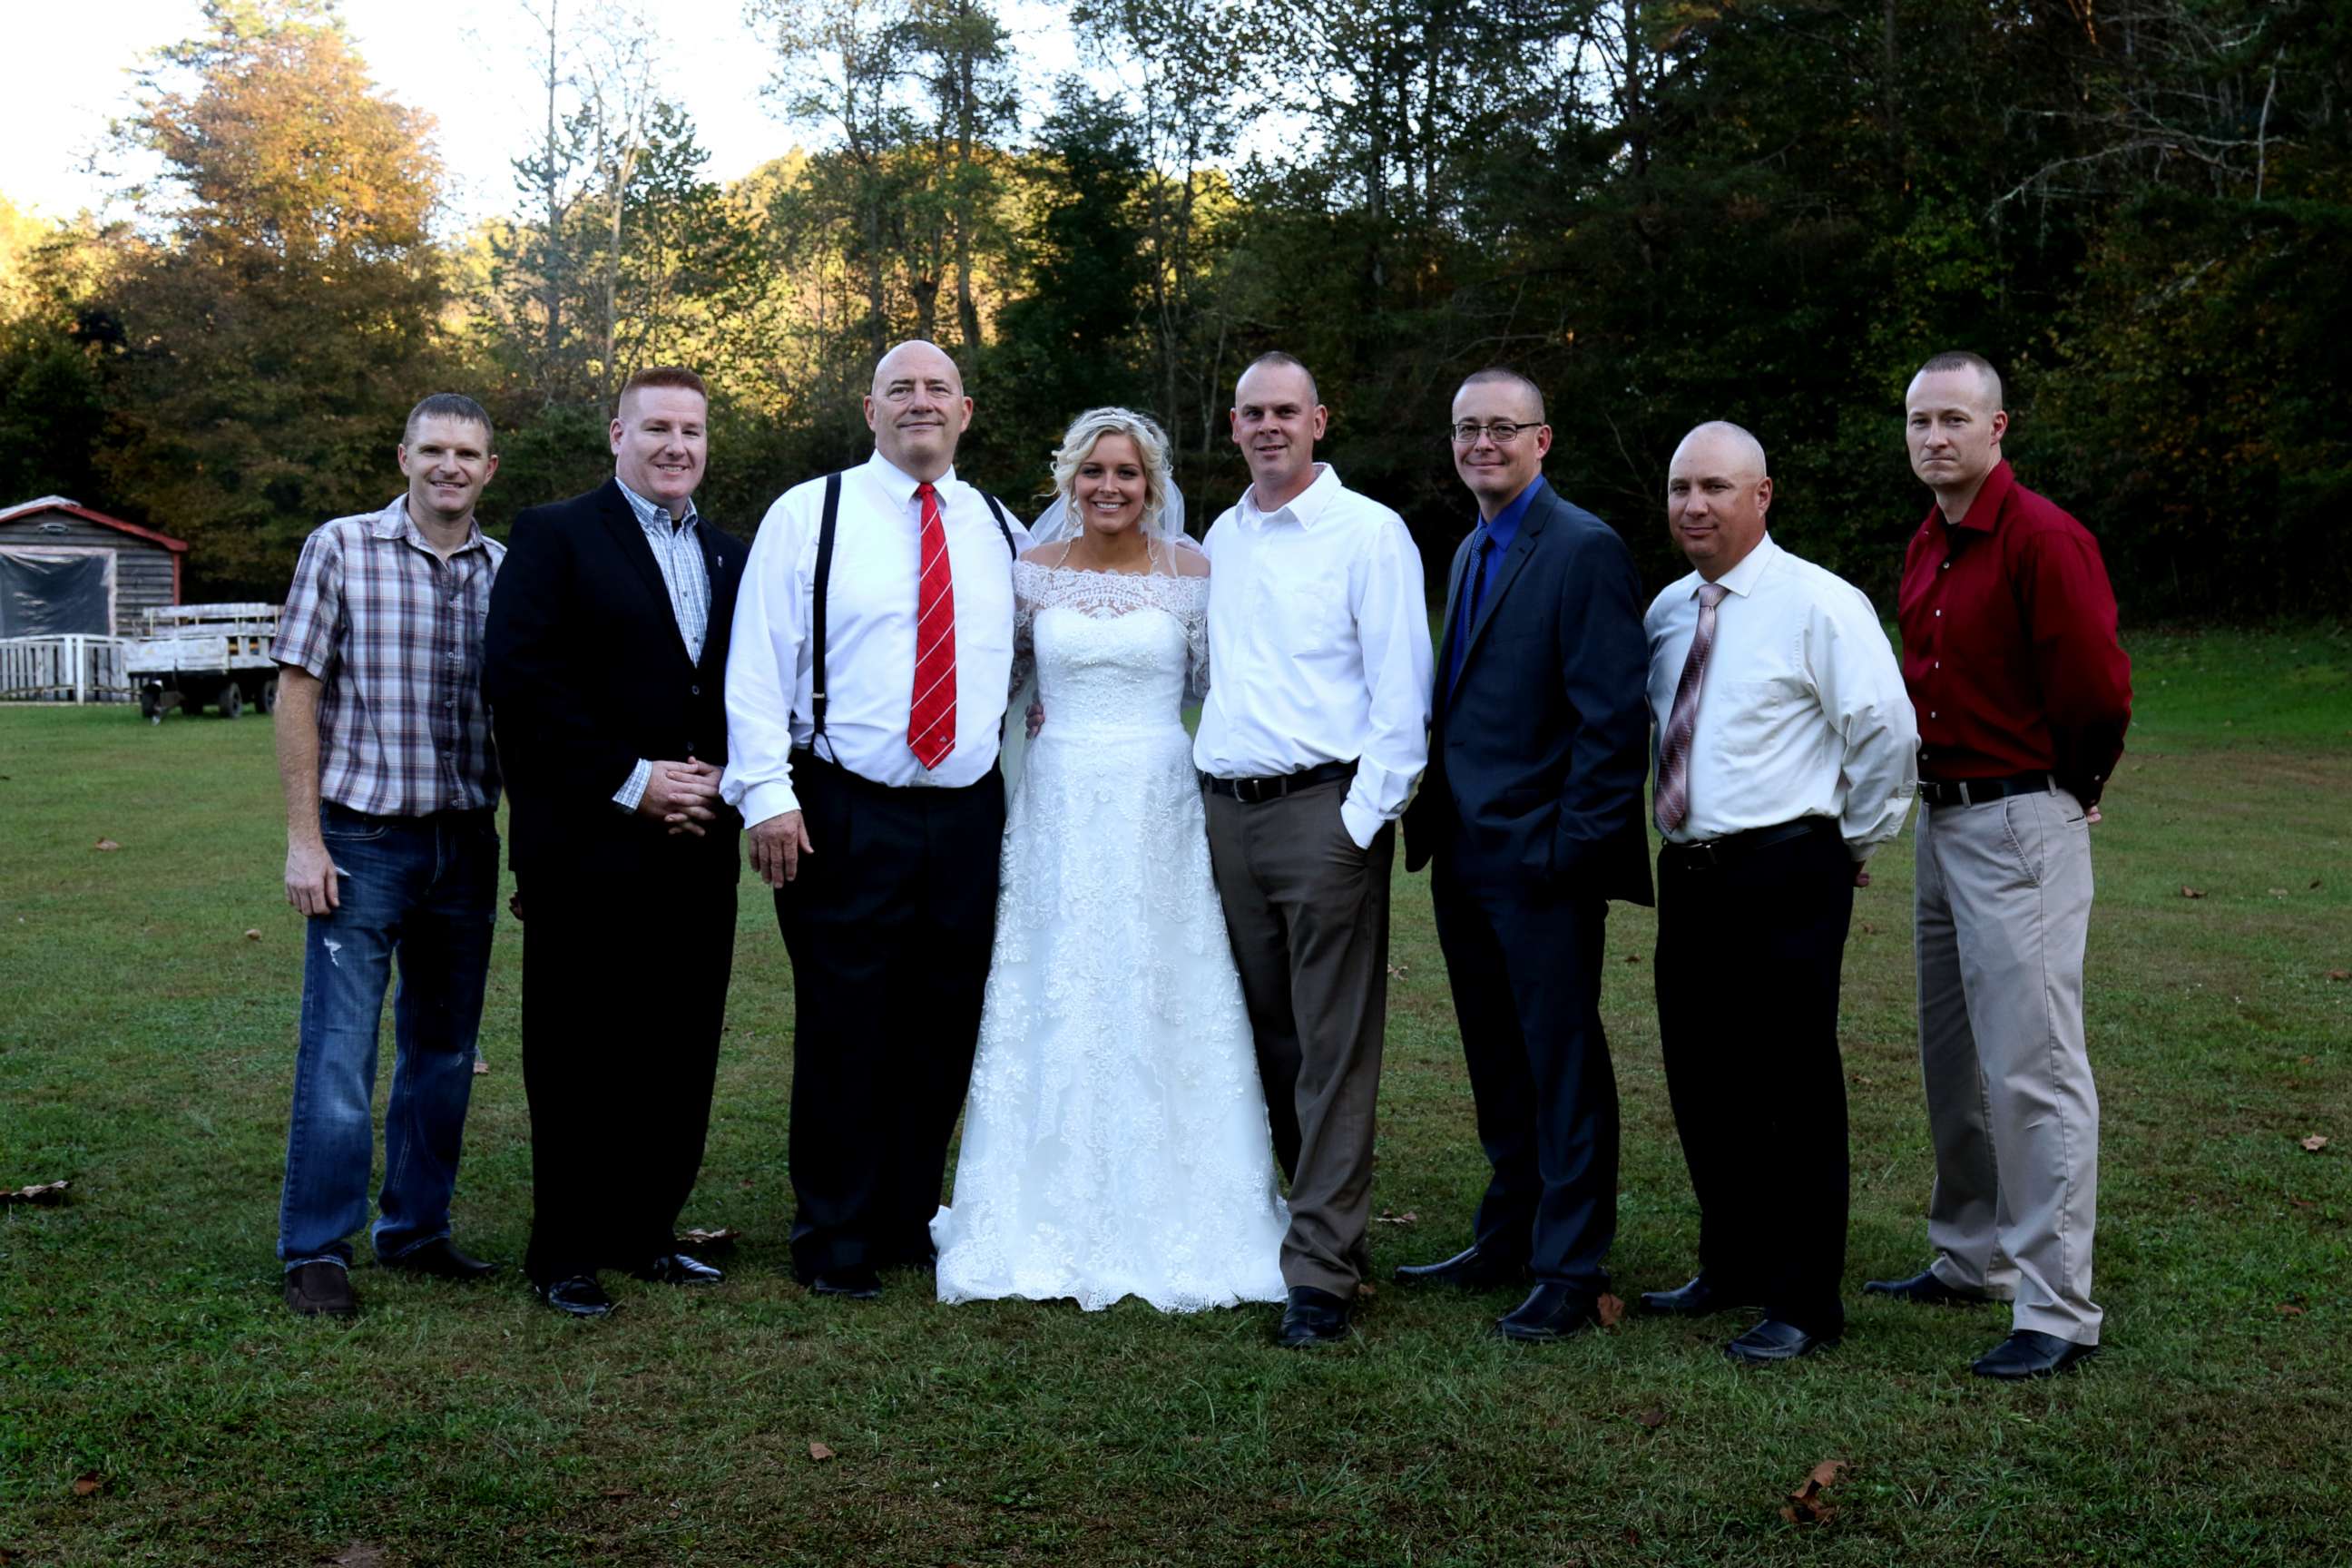 PHOTO: Mikayla Wroten poses with her father's former police colleagues after they surprised her with wedding dances.